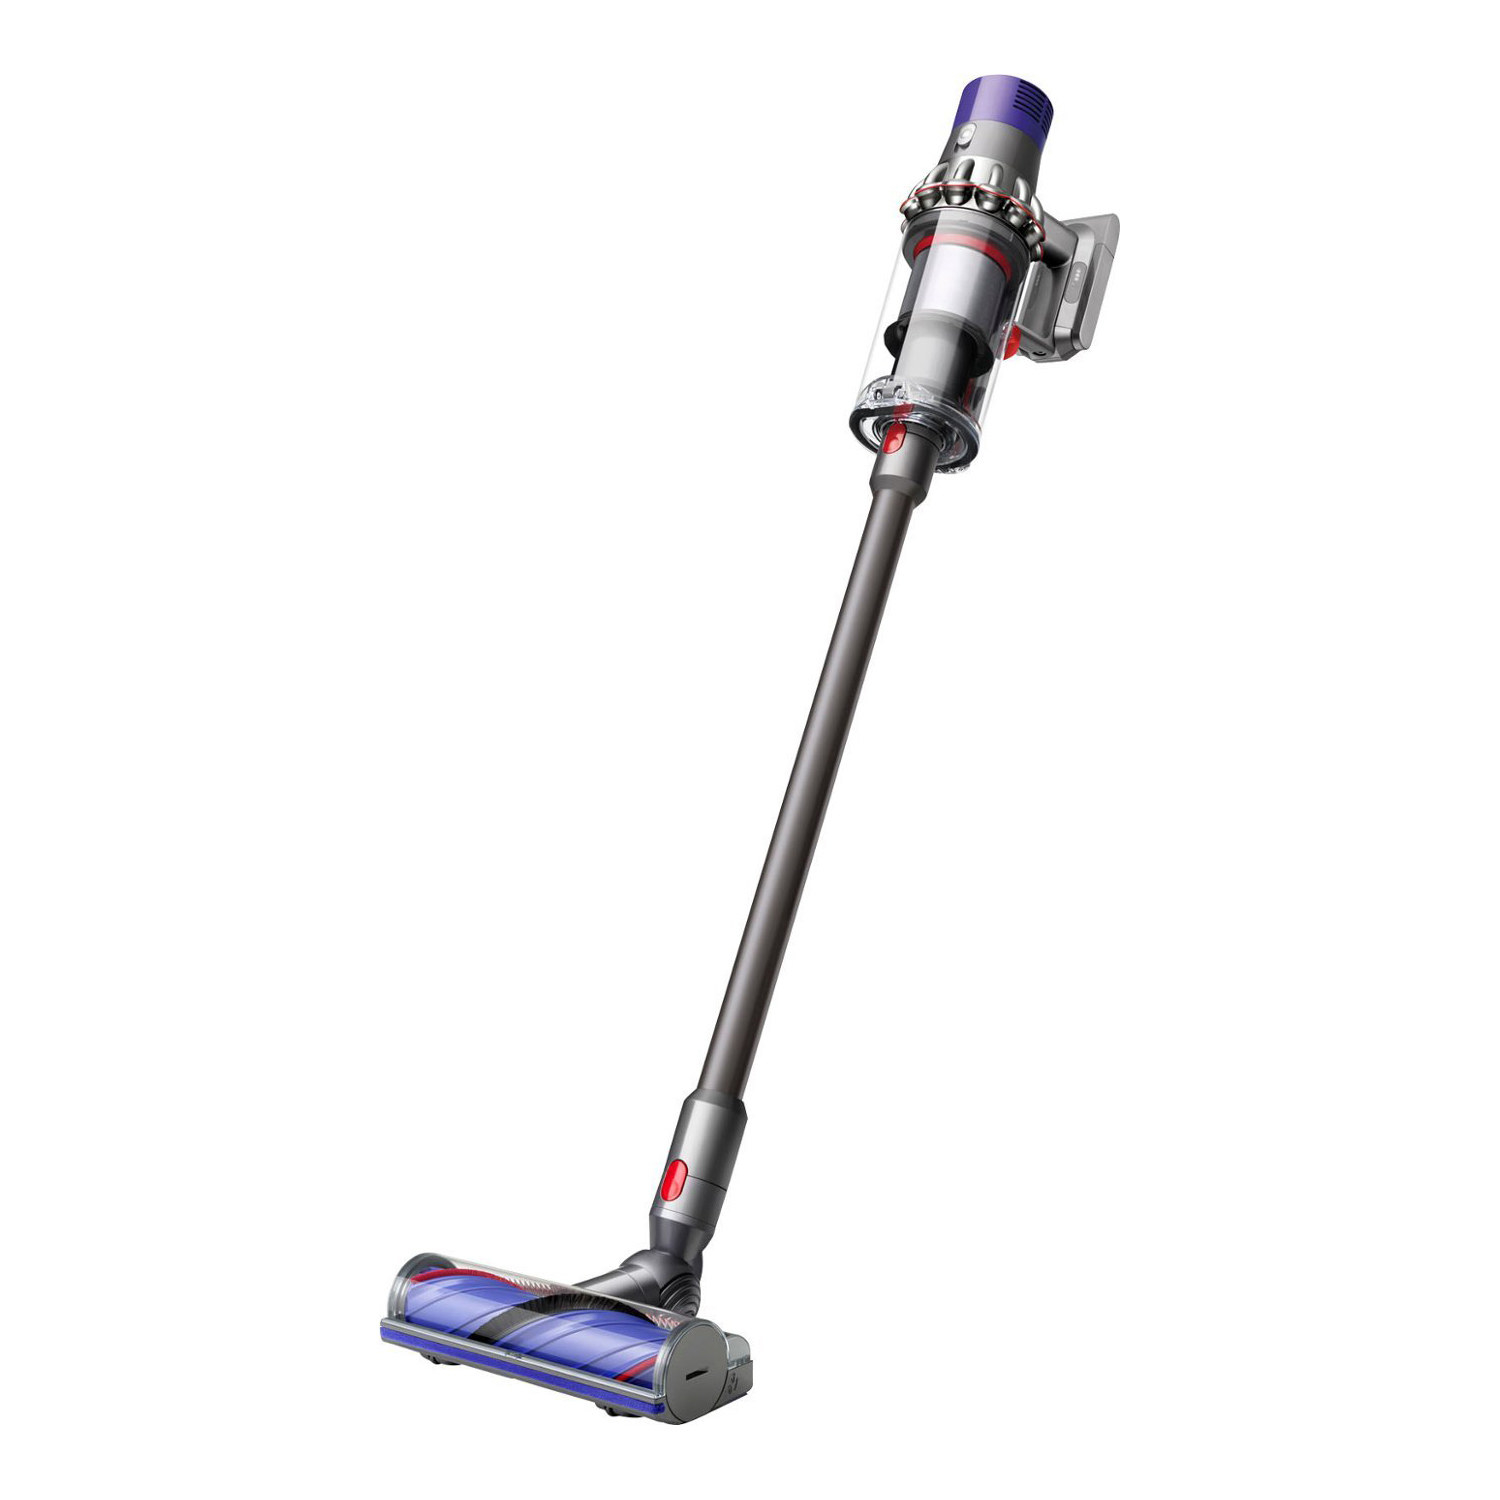 An image of a Dyson - Cyclone V10 Animal Cordless Stick Vacuum